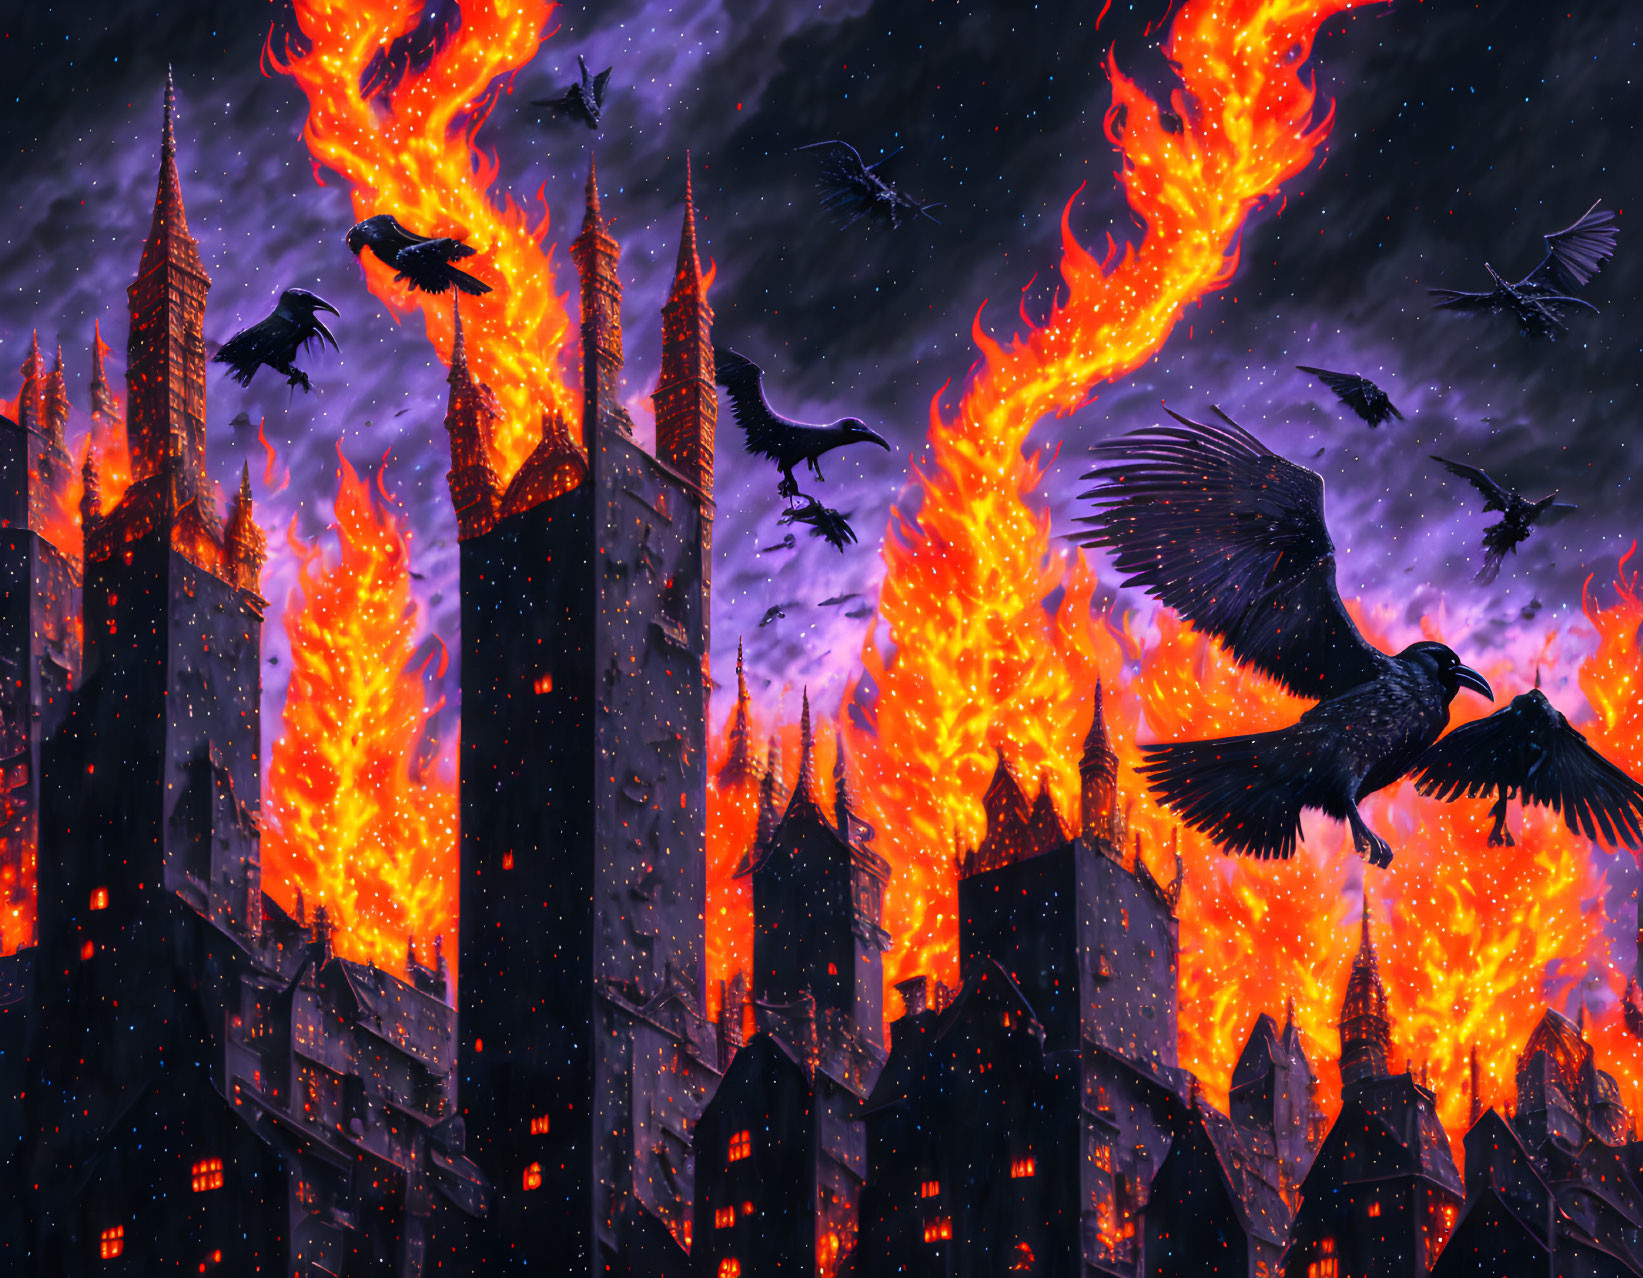 Cityscape with gothic buildings on fire at night with flying crows.